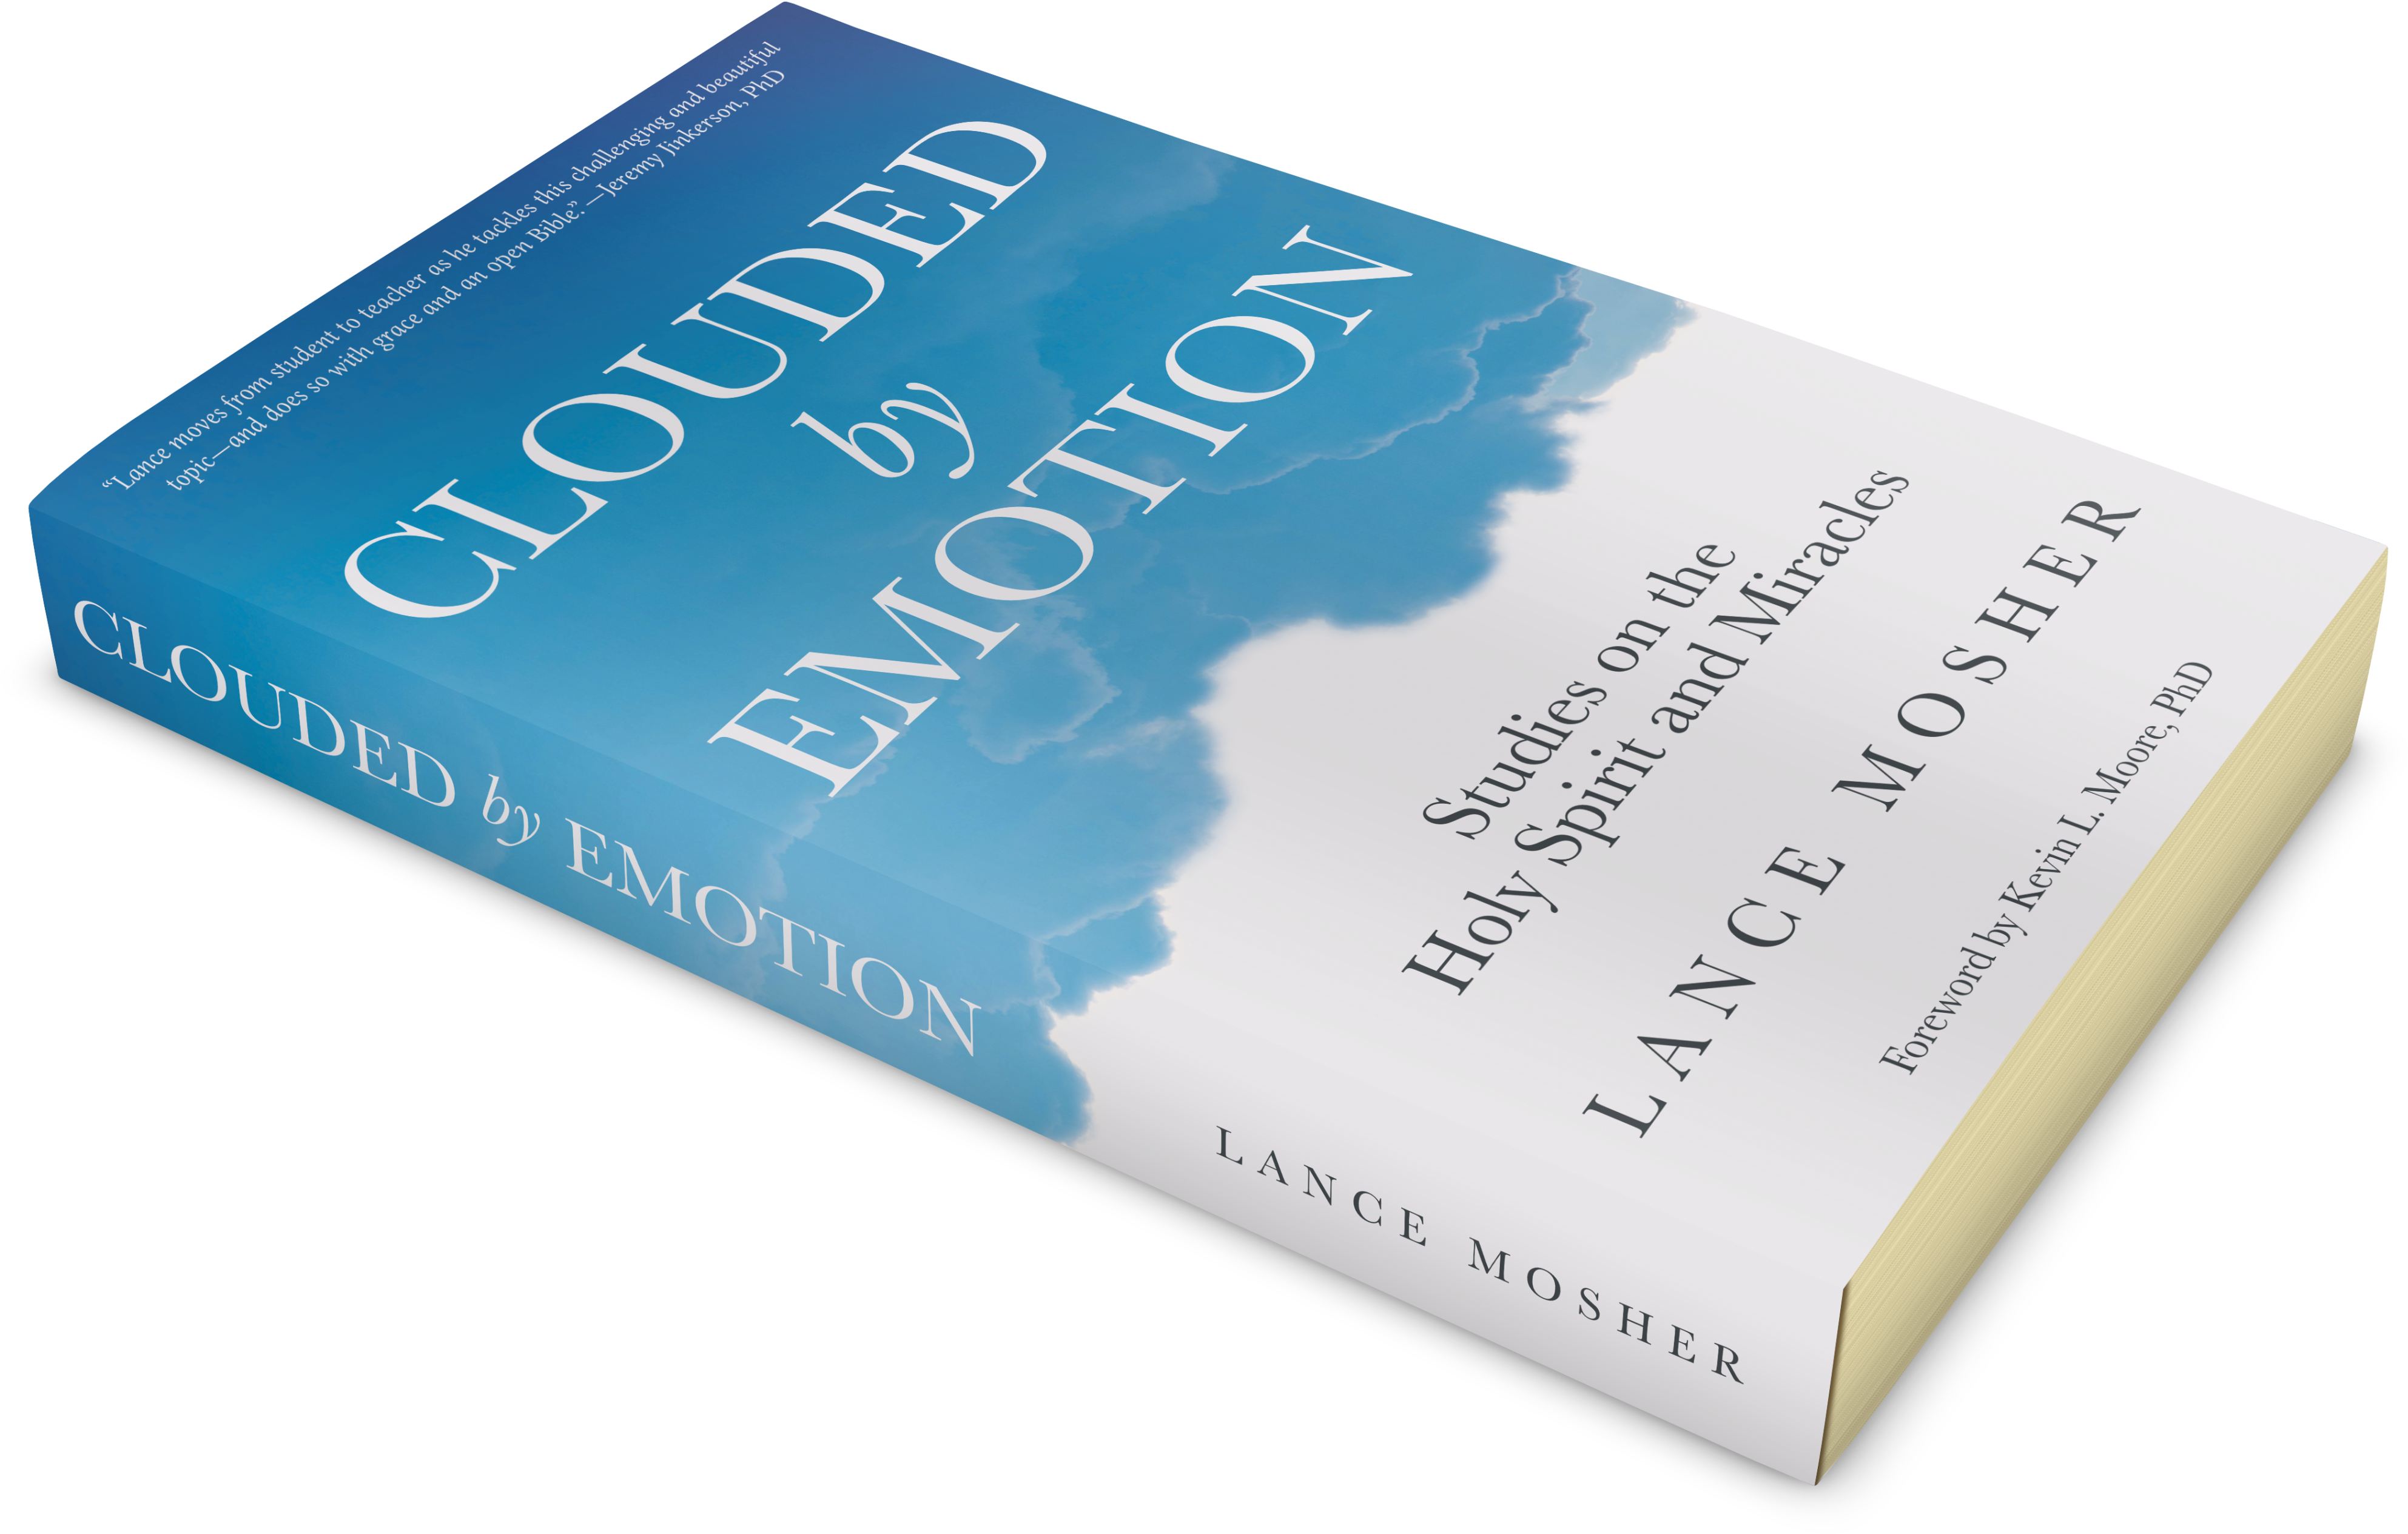 Cloudedby Emotion Book Cover PNG